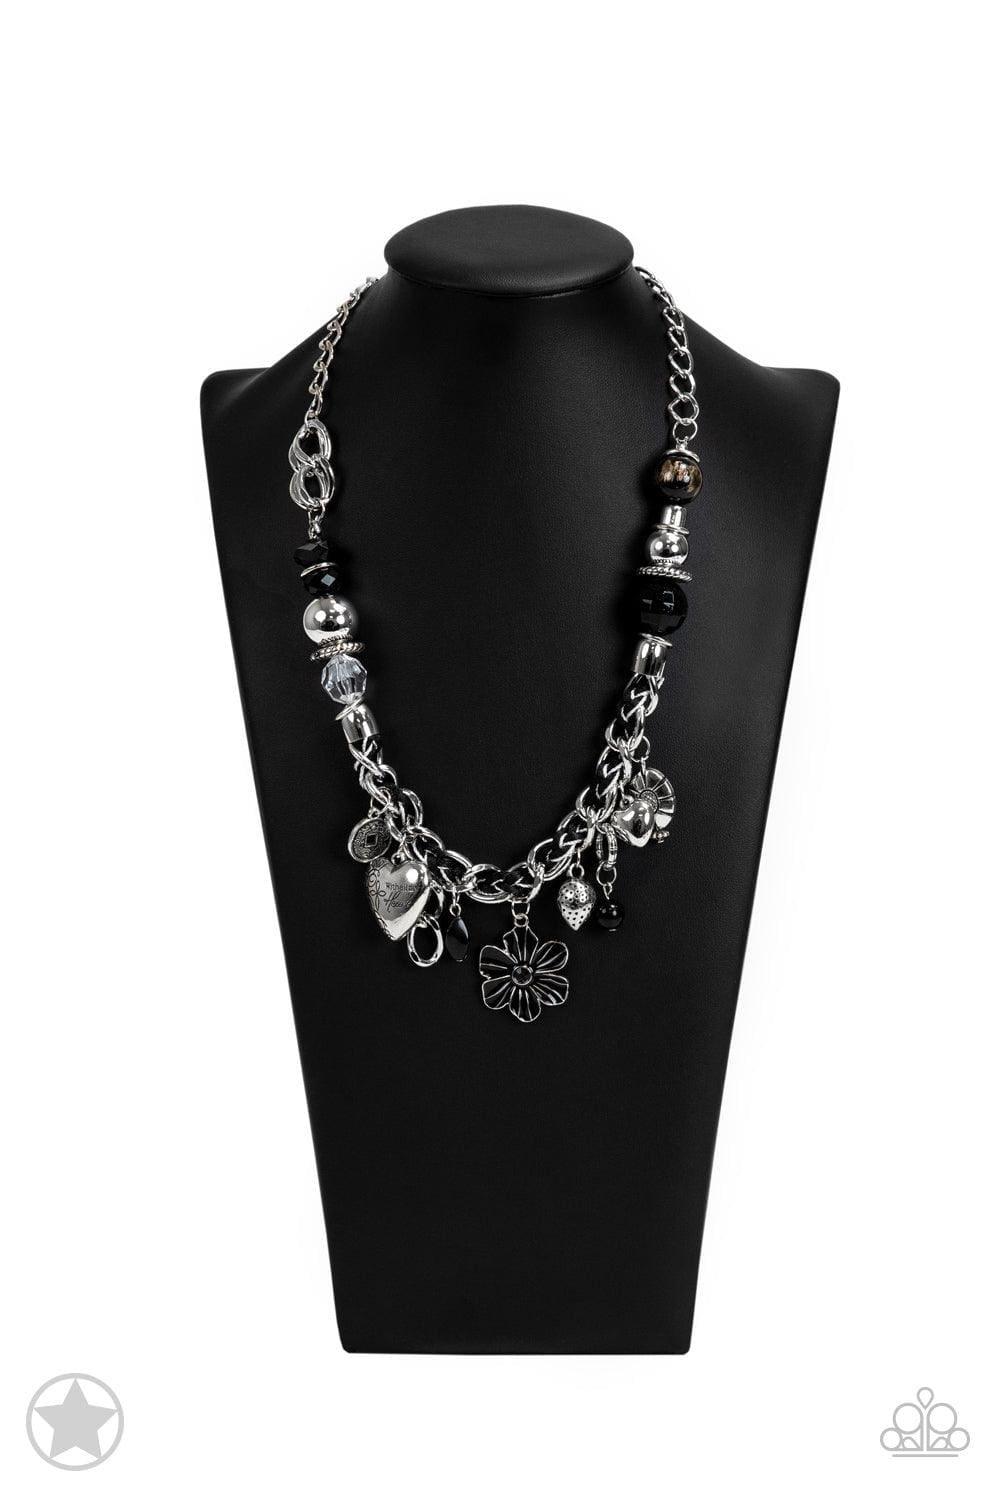 Paparazzi Accessories - Paparazzi Blockbuster Necklace: Charmed, i Am Sure Black - Bling by JessieK